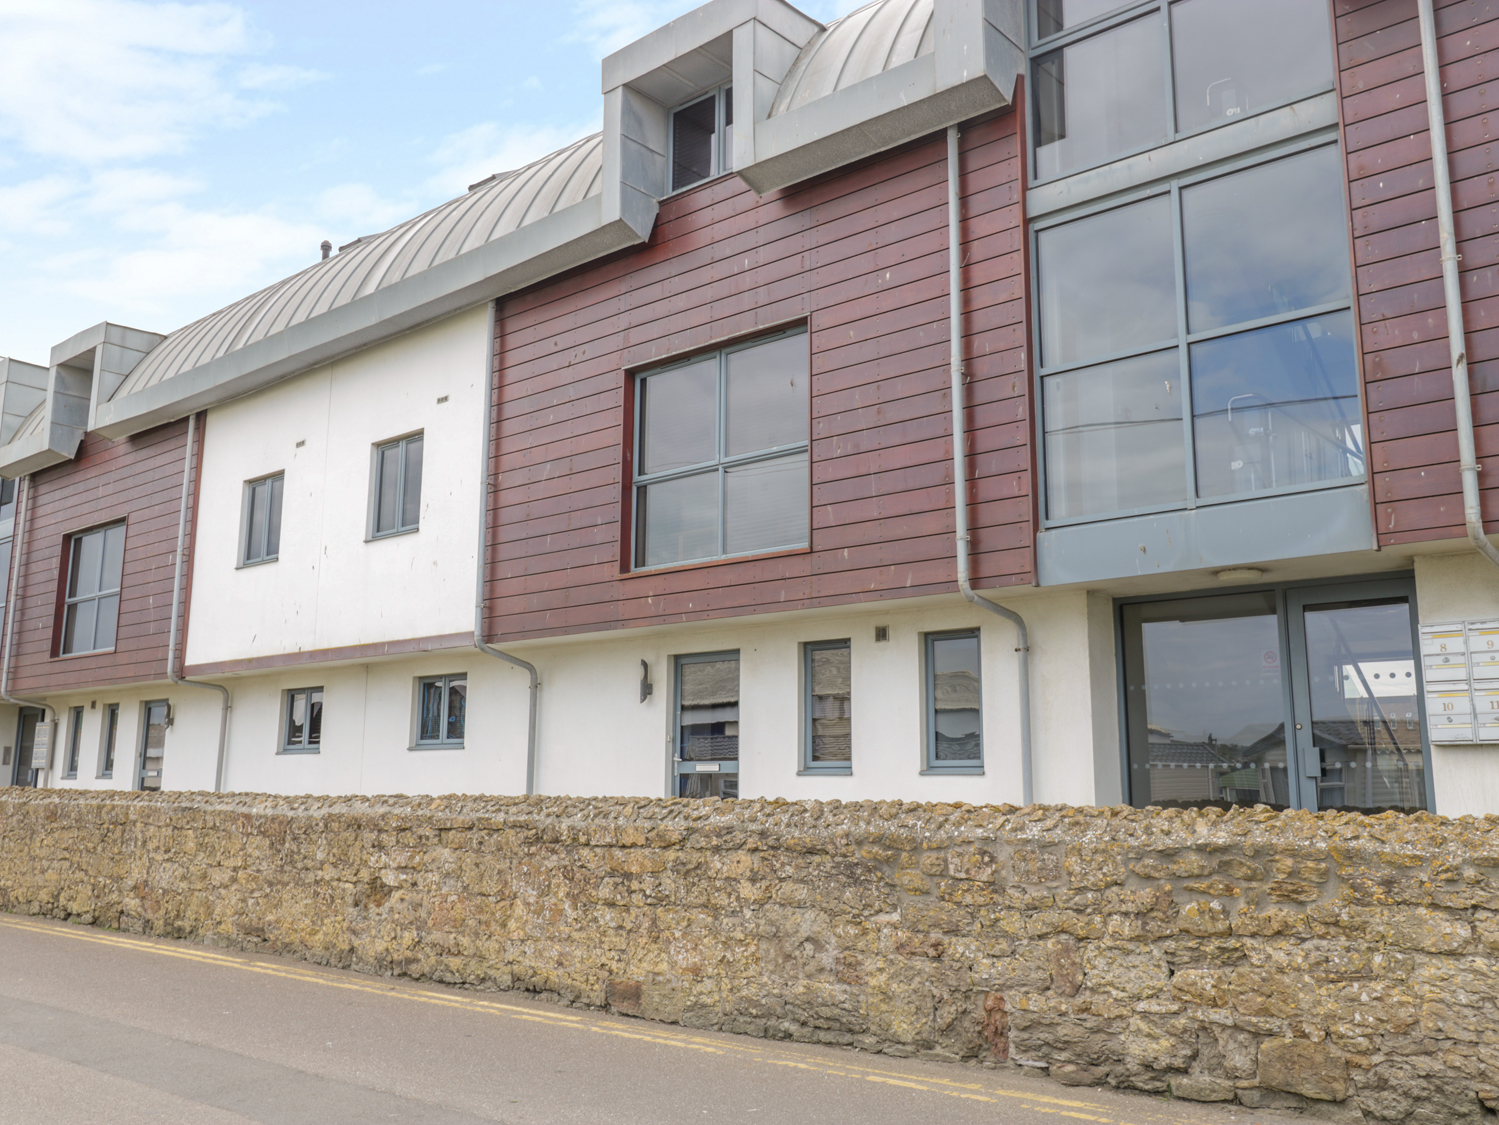 Apartment 7 Dog Friendly Holiday Cottage in West Bay